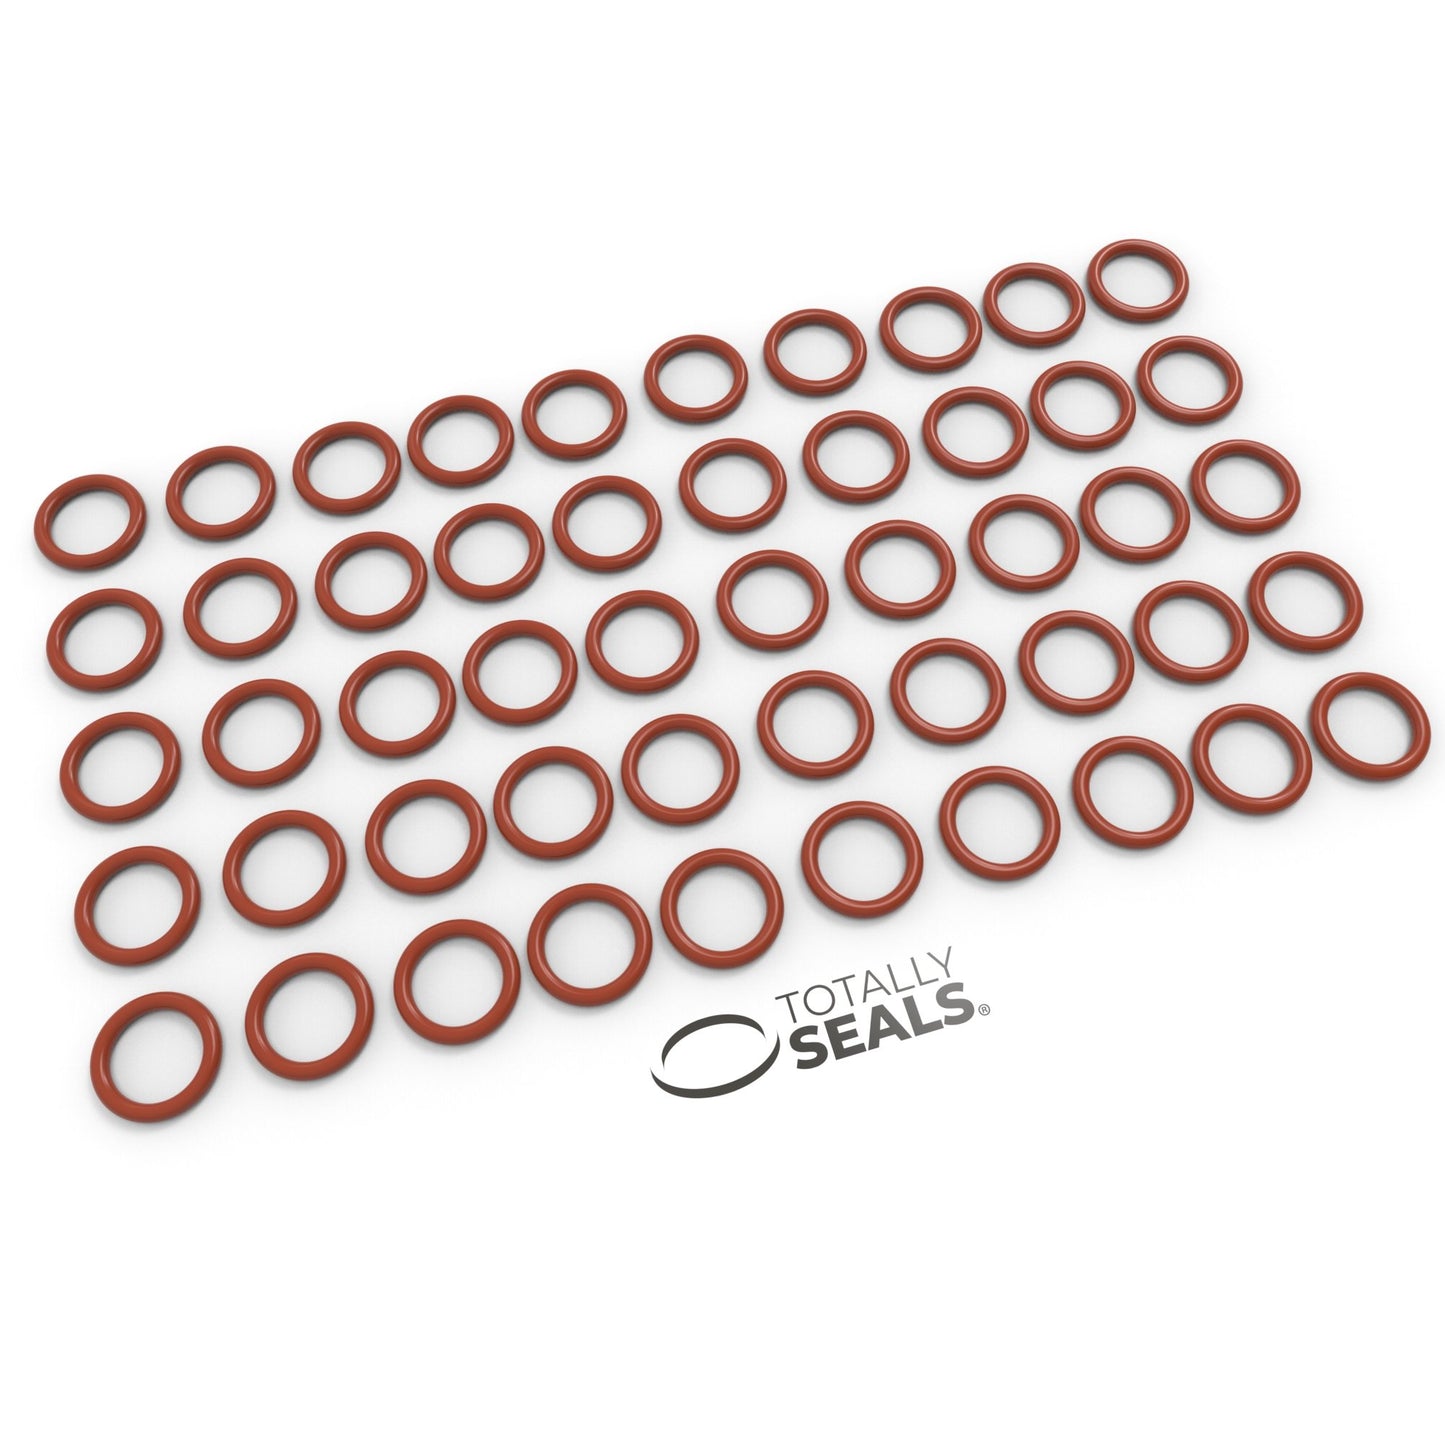 22mm x 3mm (28mm OD) Silicone O-Rings - Totally Seals®